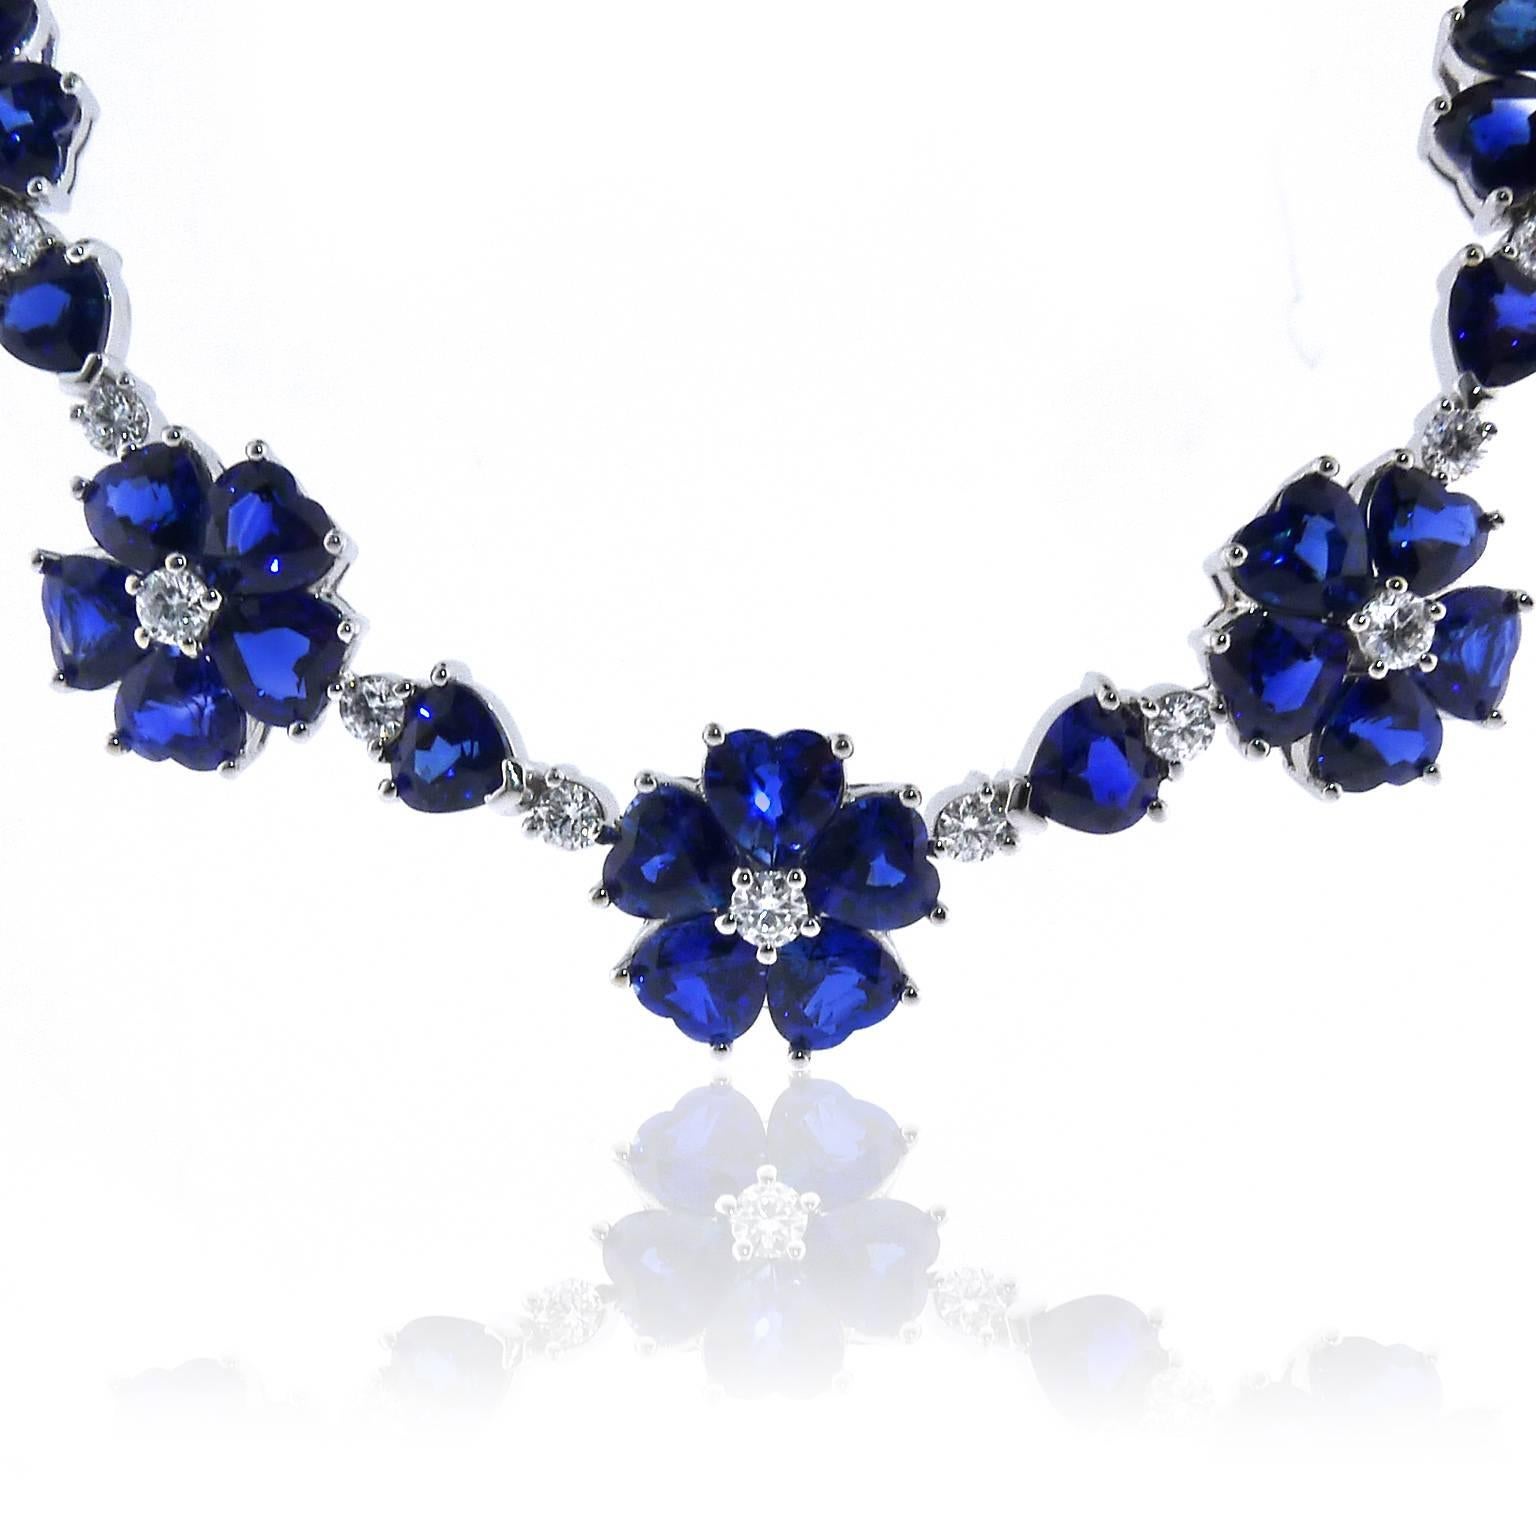 This stunning necklace boasts over 25 carats of bright blue sapphires and over 3 carats of brilliant cut diamonds. Measures 17.75 inches long and can be made longer with extra links for an additional cost. Sapphires were sourced at the prestigious